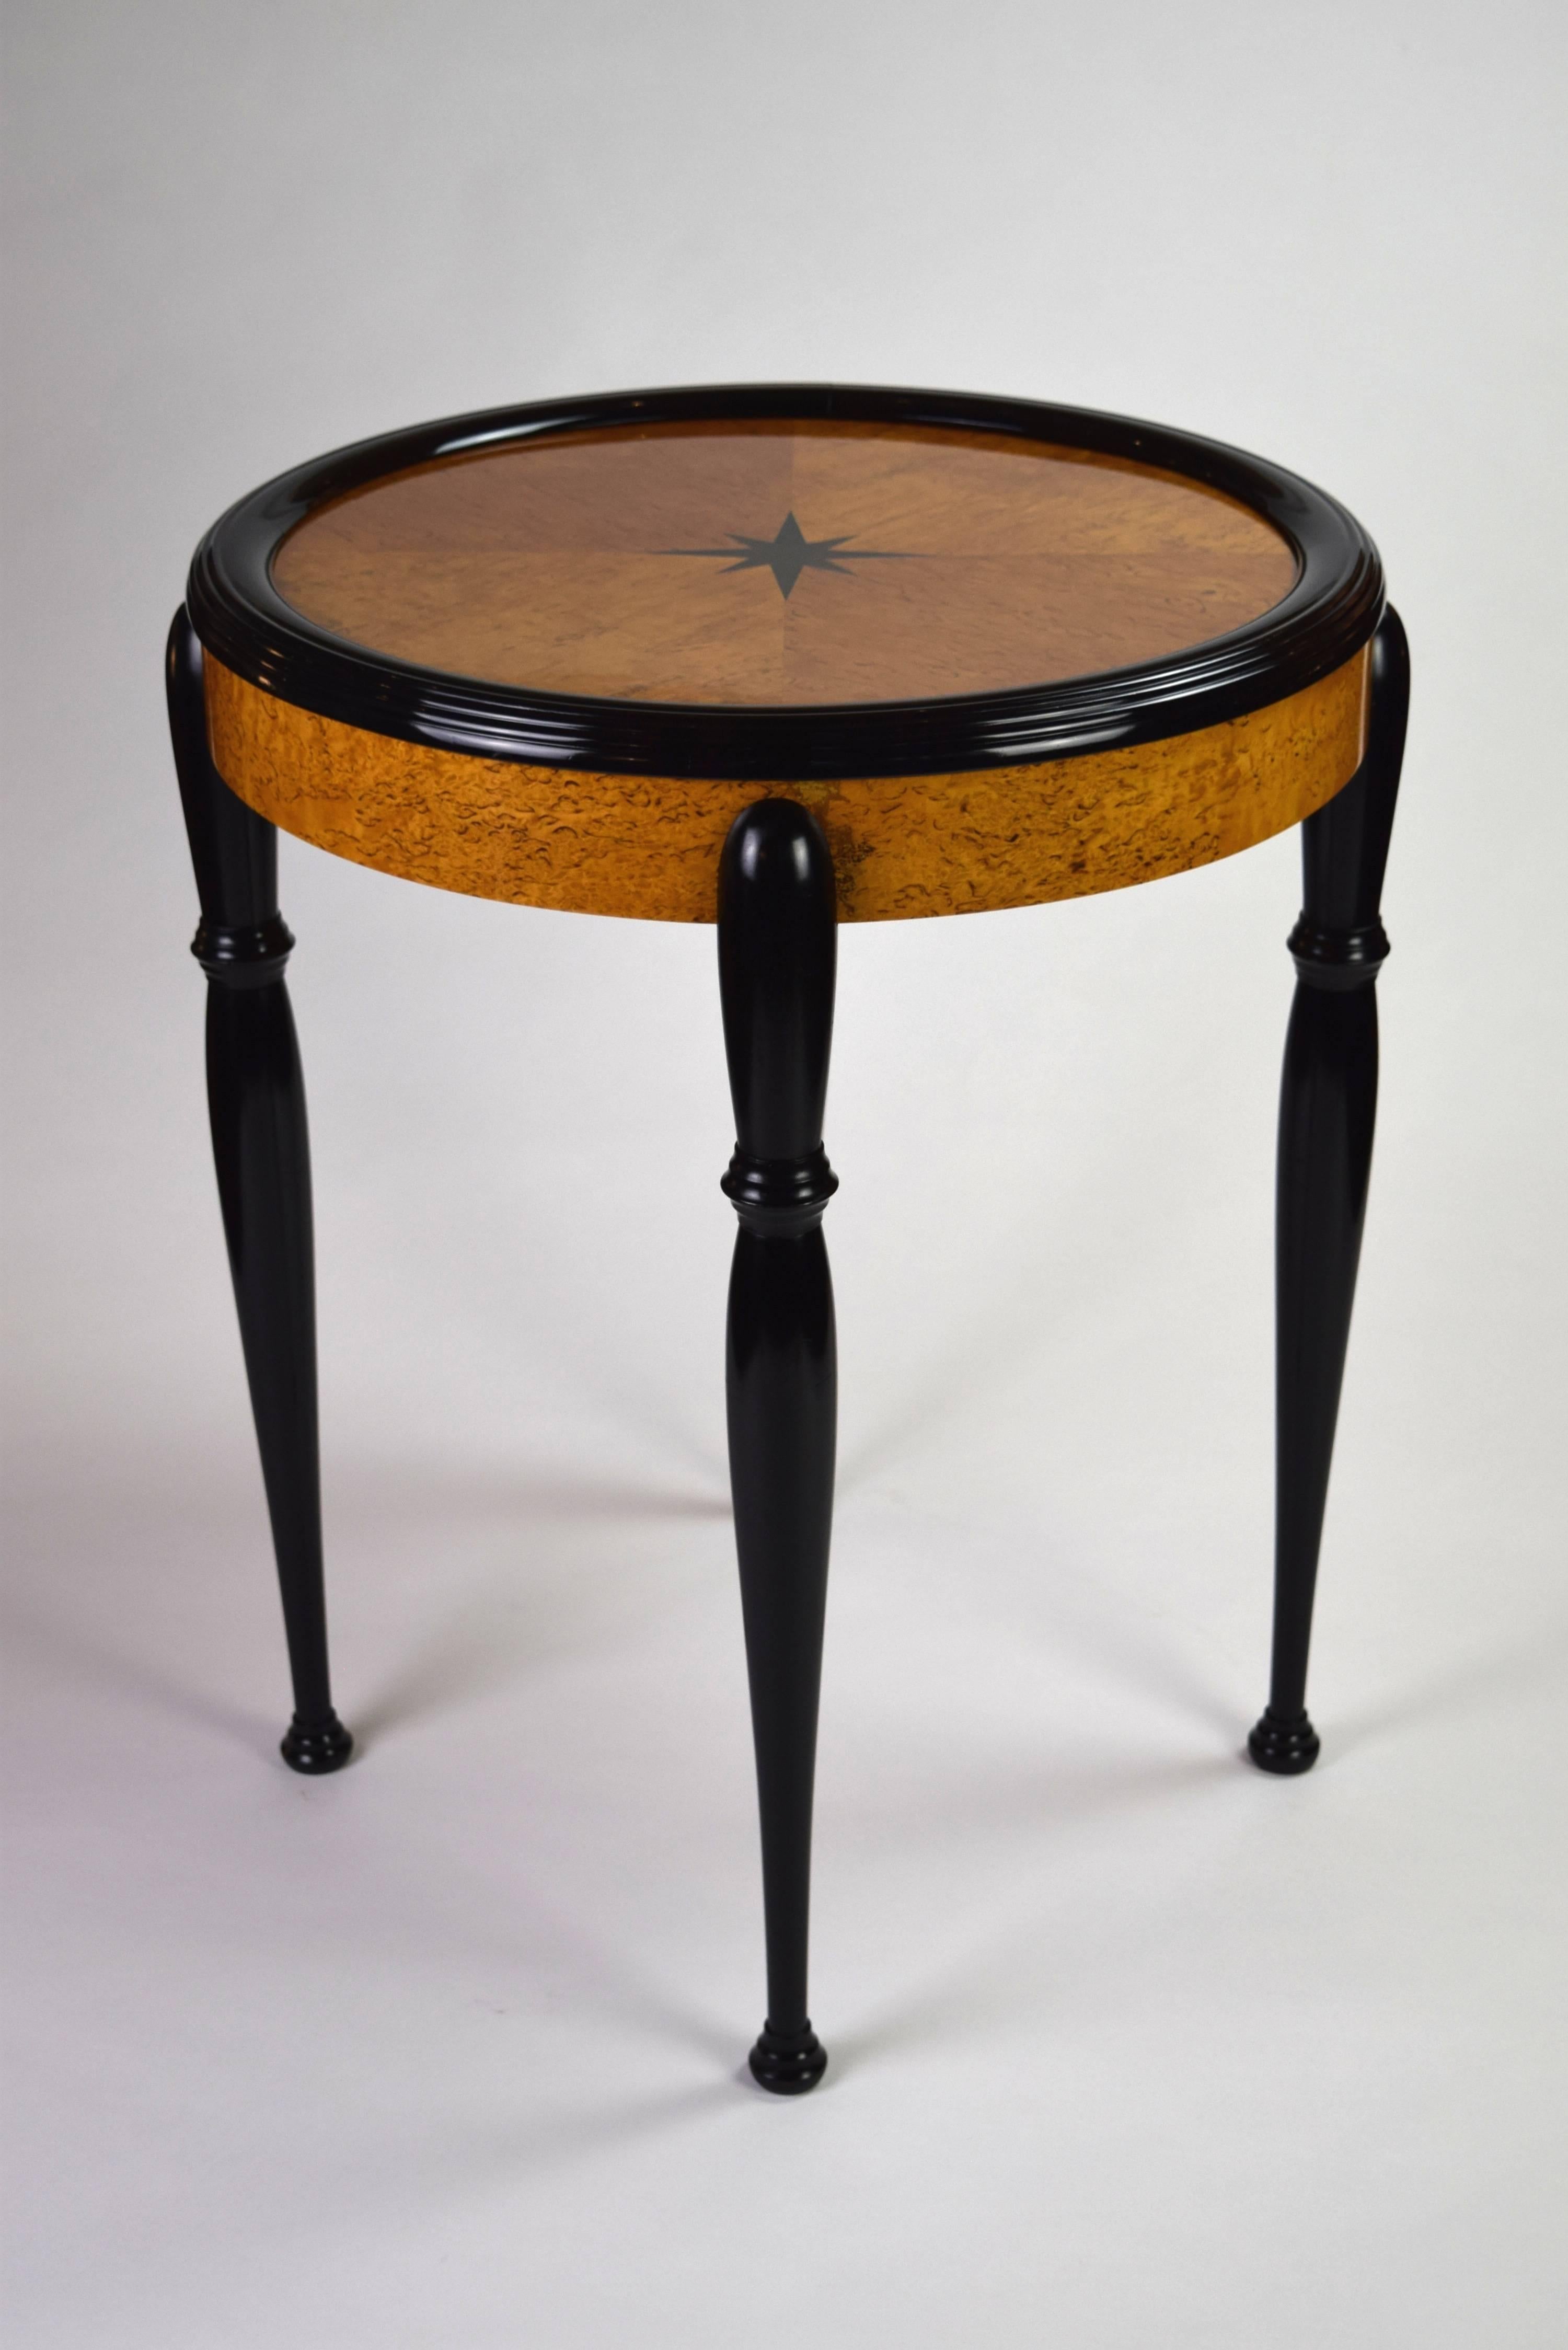 This elegant table features a circular parquetry top centered by a star and surrounded by a ripple-molded border, raised on slender tapering baluster legs.